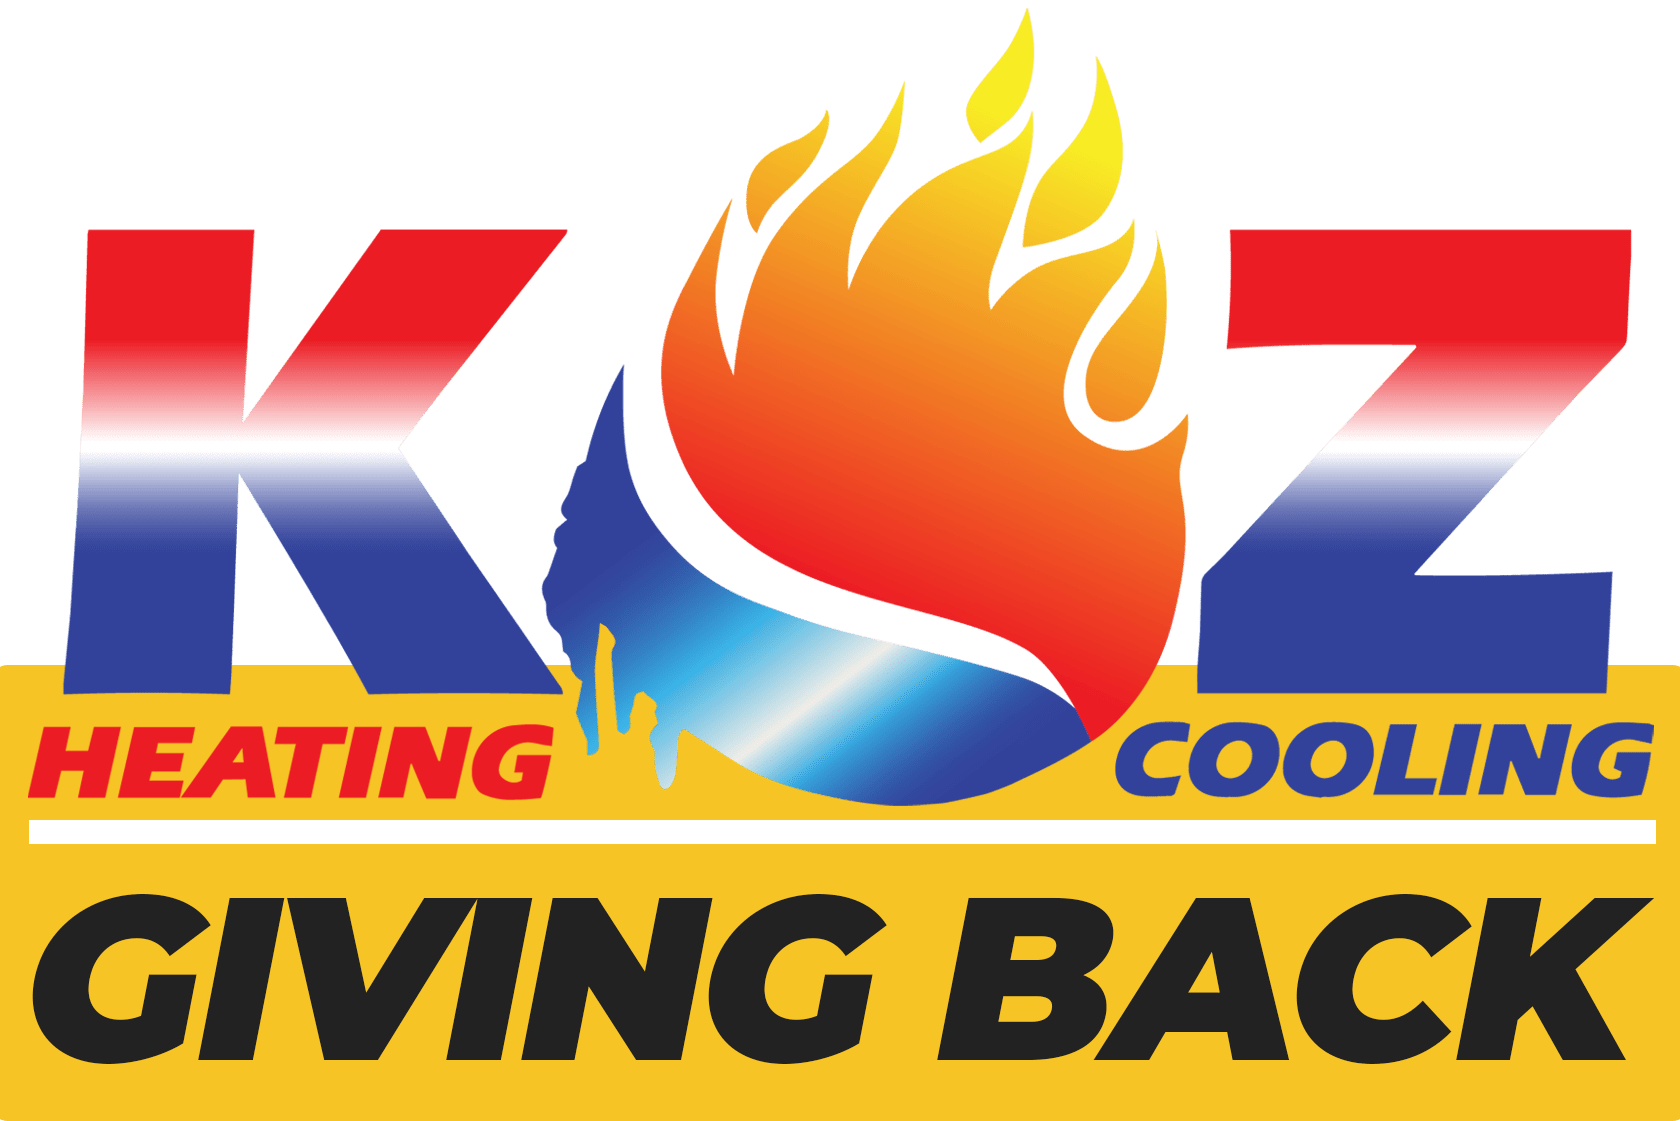 Koz Heating & Cooling is giving back to the local community of Shelby Township MI and the surrounding areas.